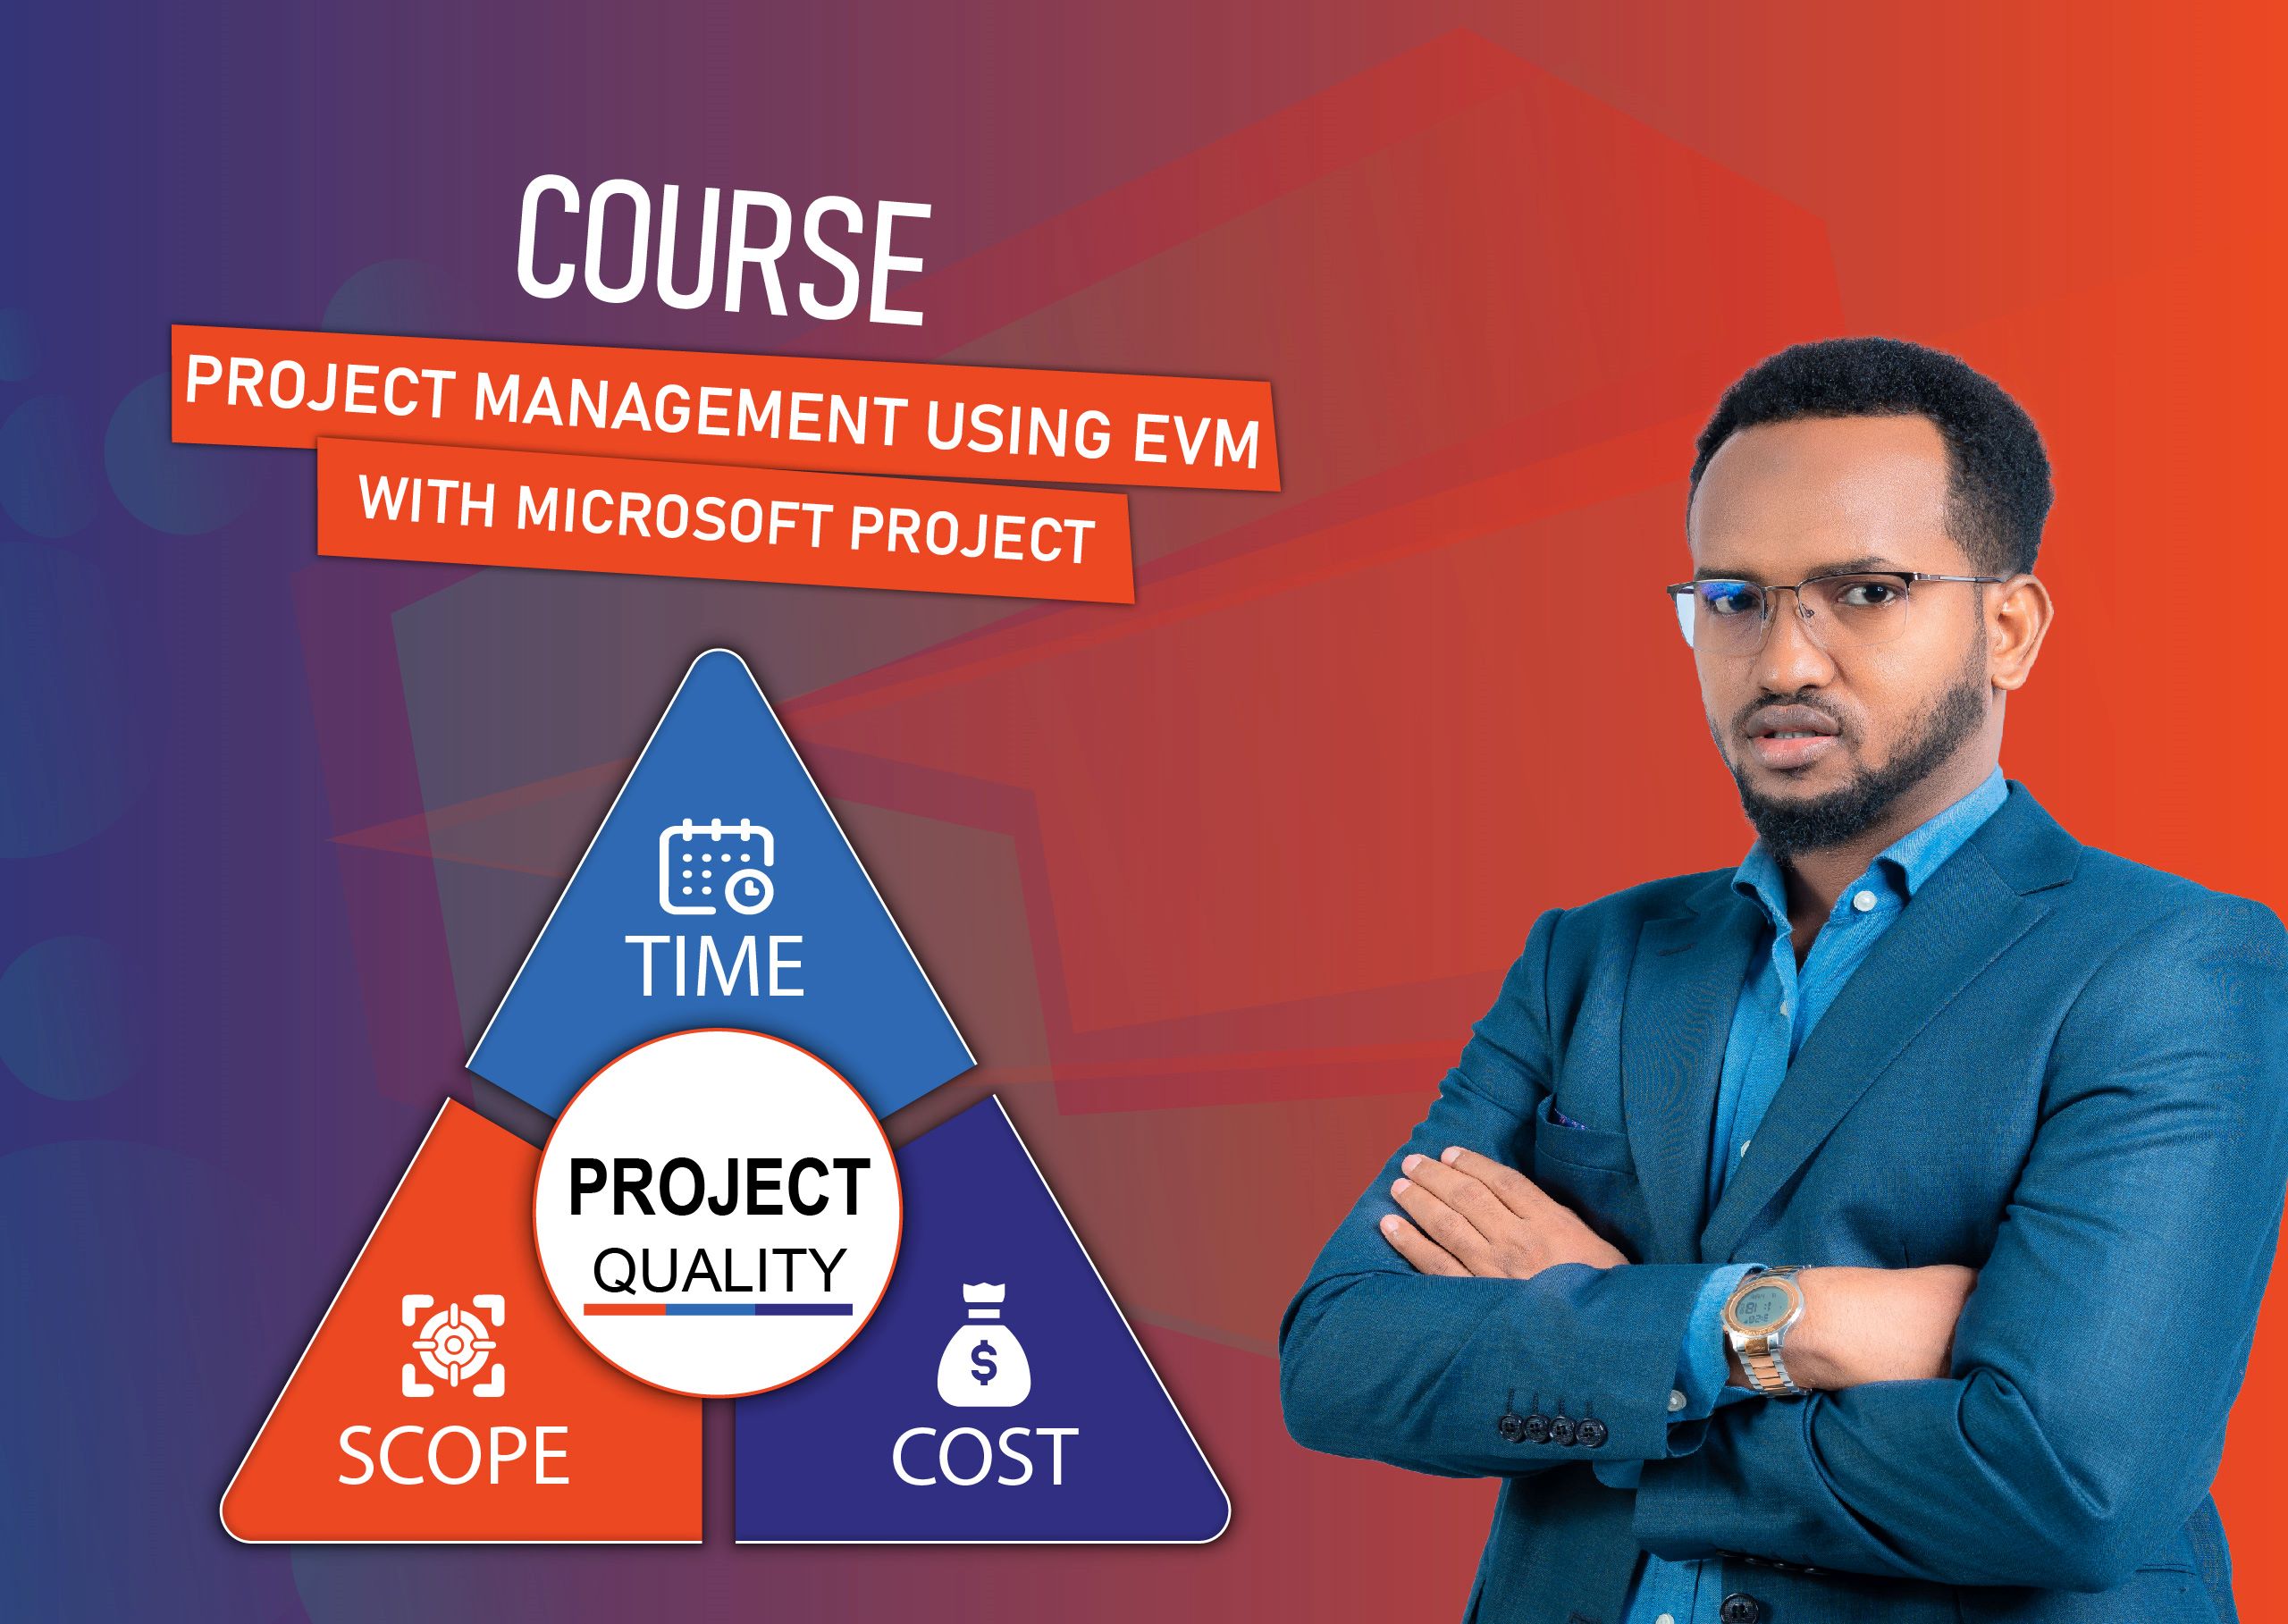 Project Management Using EVM with Microsoft project